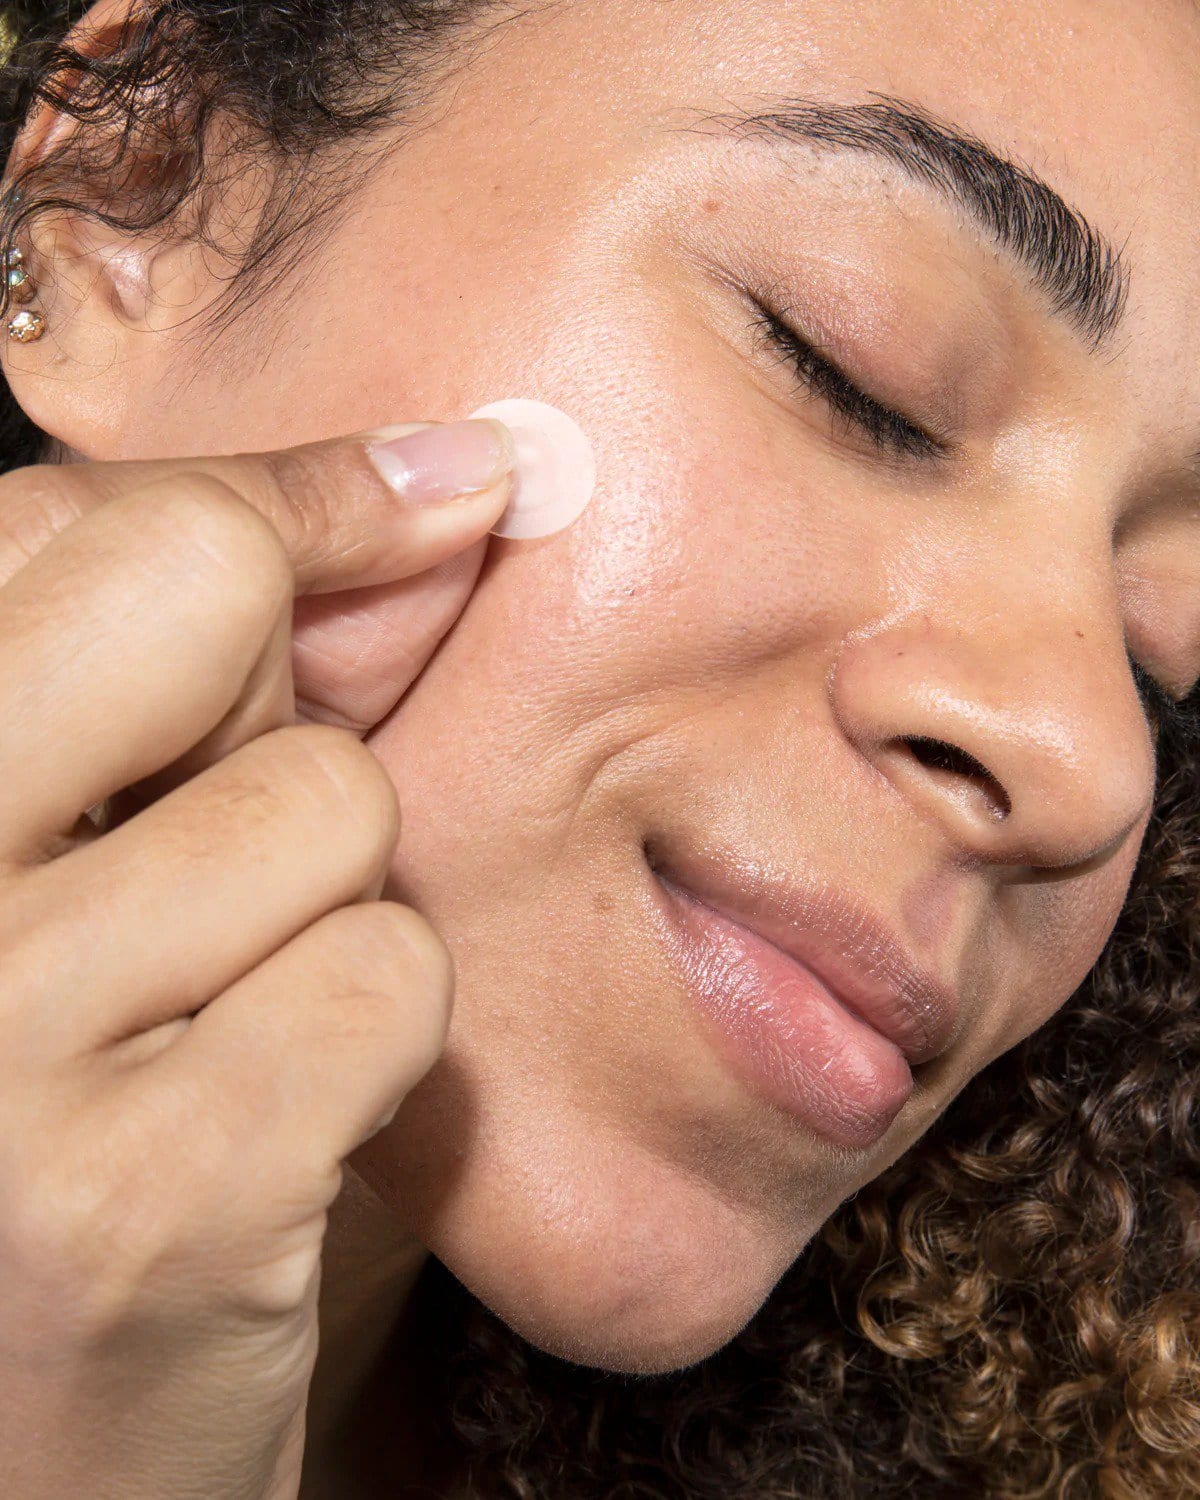 17 Of The Best Skincare Products For Acne: Facial Treatments Right At Home